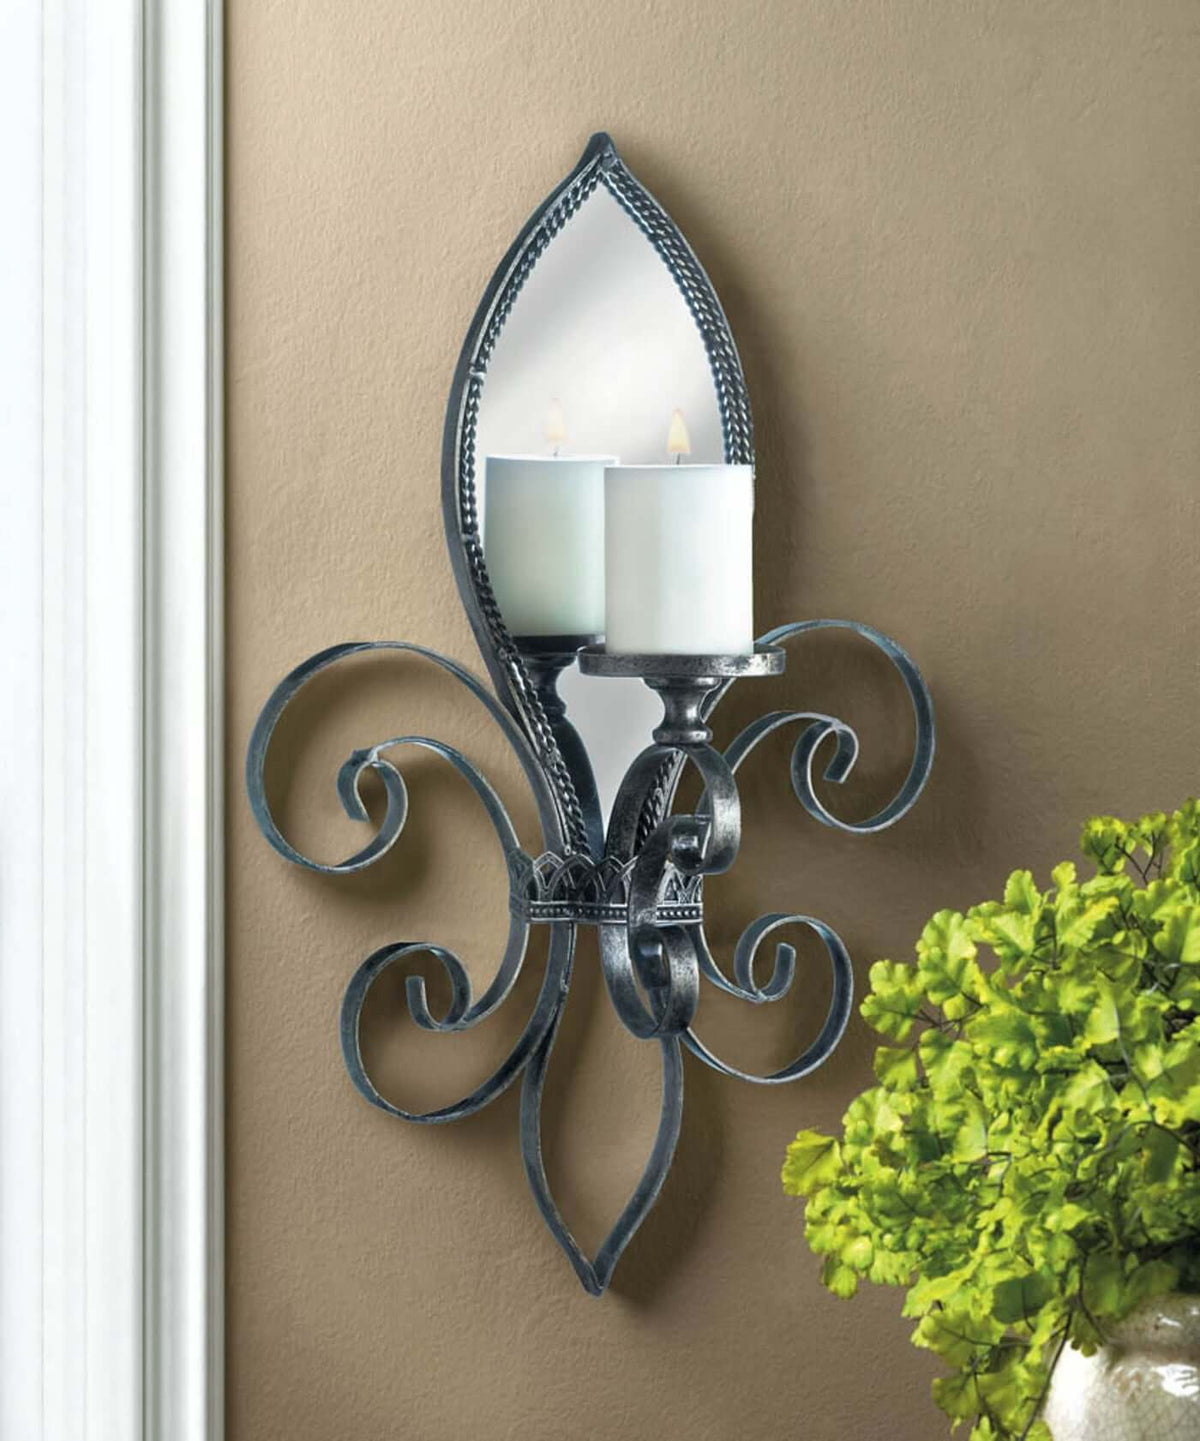 Fleur-de-lis Mirrored Wall Sconce - The House of Awareness